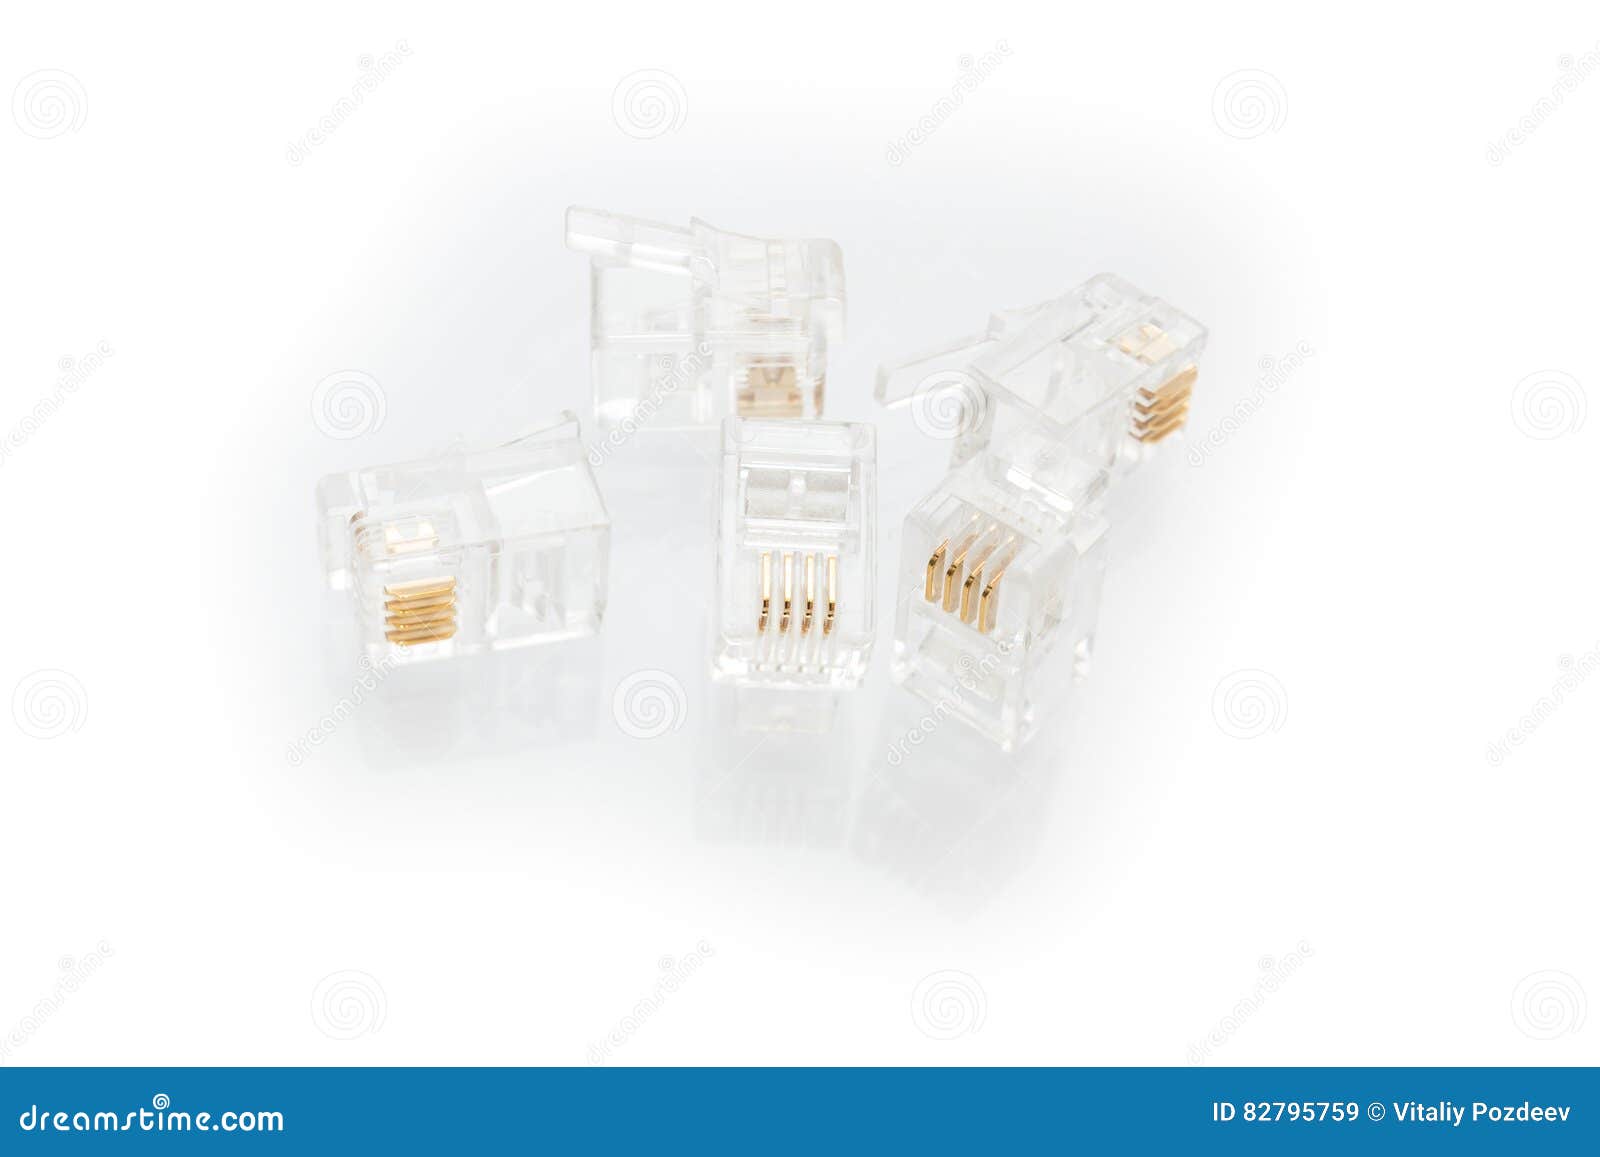 a lot of phone connector plugs